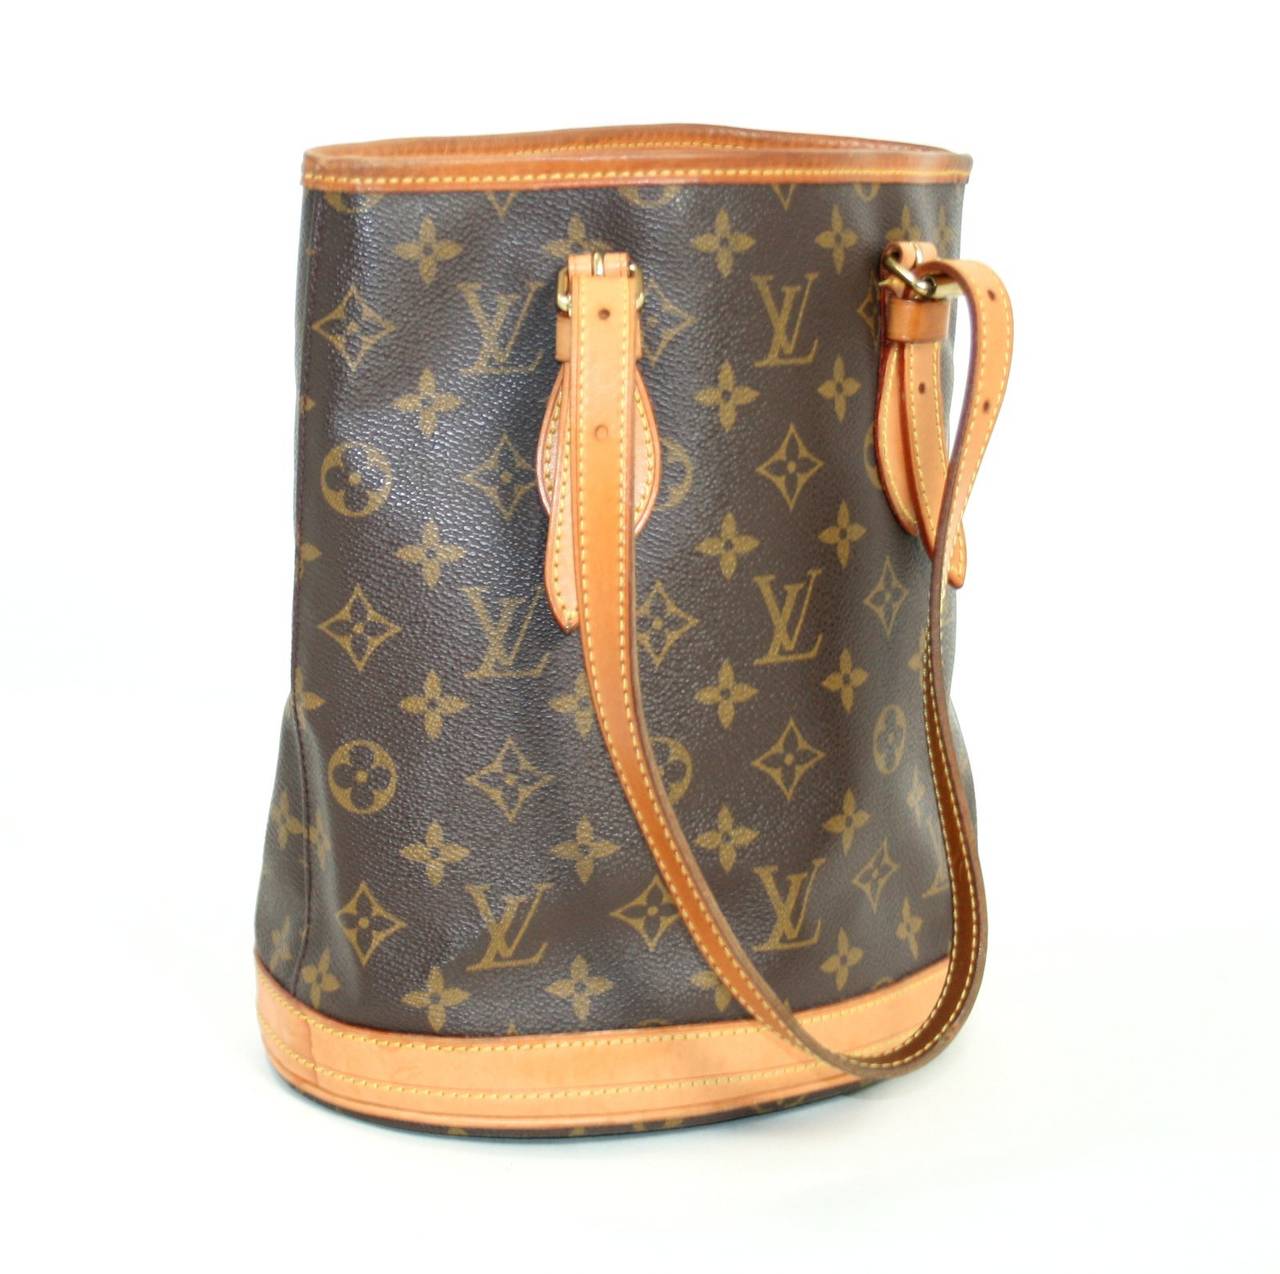 Louis Vuitton’s Monogram Petit Bucket Bag is a classic style in very good condition.  The exterior canvas appears excellent and the interior is very clean.  The natural cowhide has appropriately darkened with the honey colored patina associated with